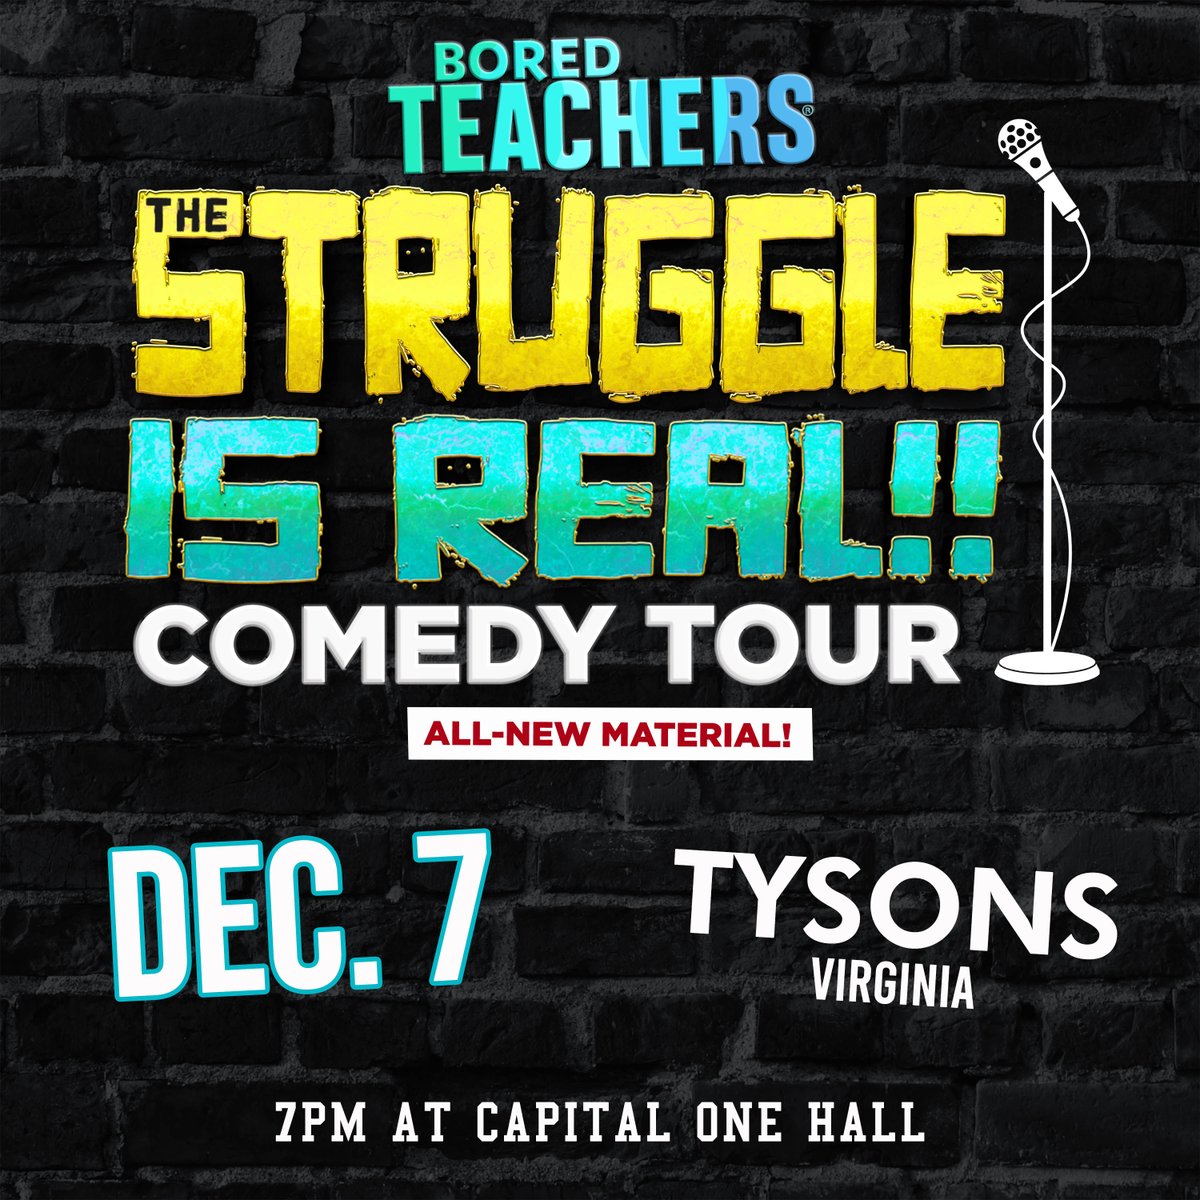 .@Bored_Teachers will make their return to Capital One Hall this winter! ✏️🤣📚 They'll be bringing The Struggle Is Real Comedy Tour to Tysons, VA on December 7, 2024 and tickets go on sale this Monday, April 22 at 10AM via Ticketmaster 🎟️